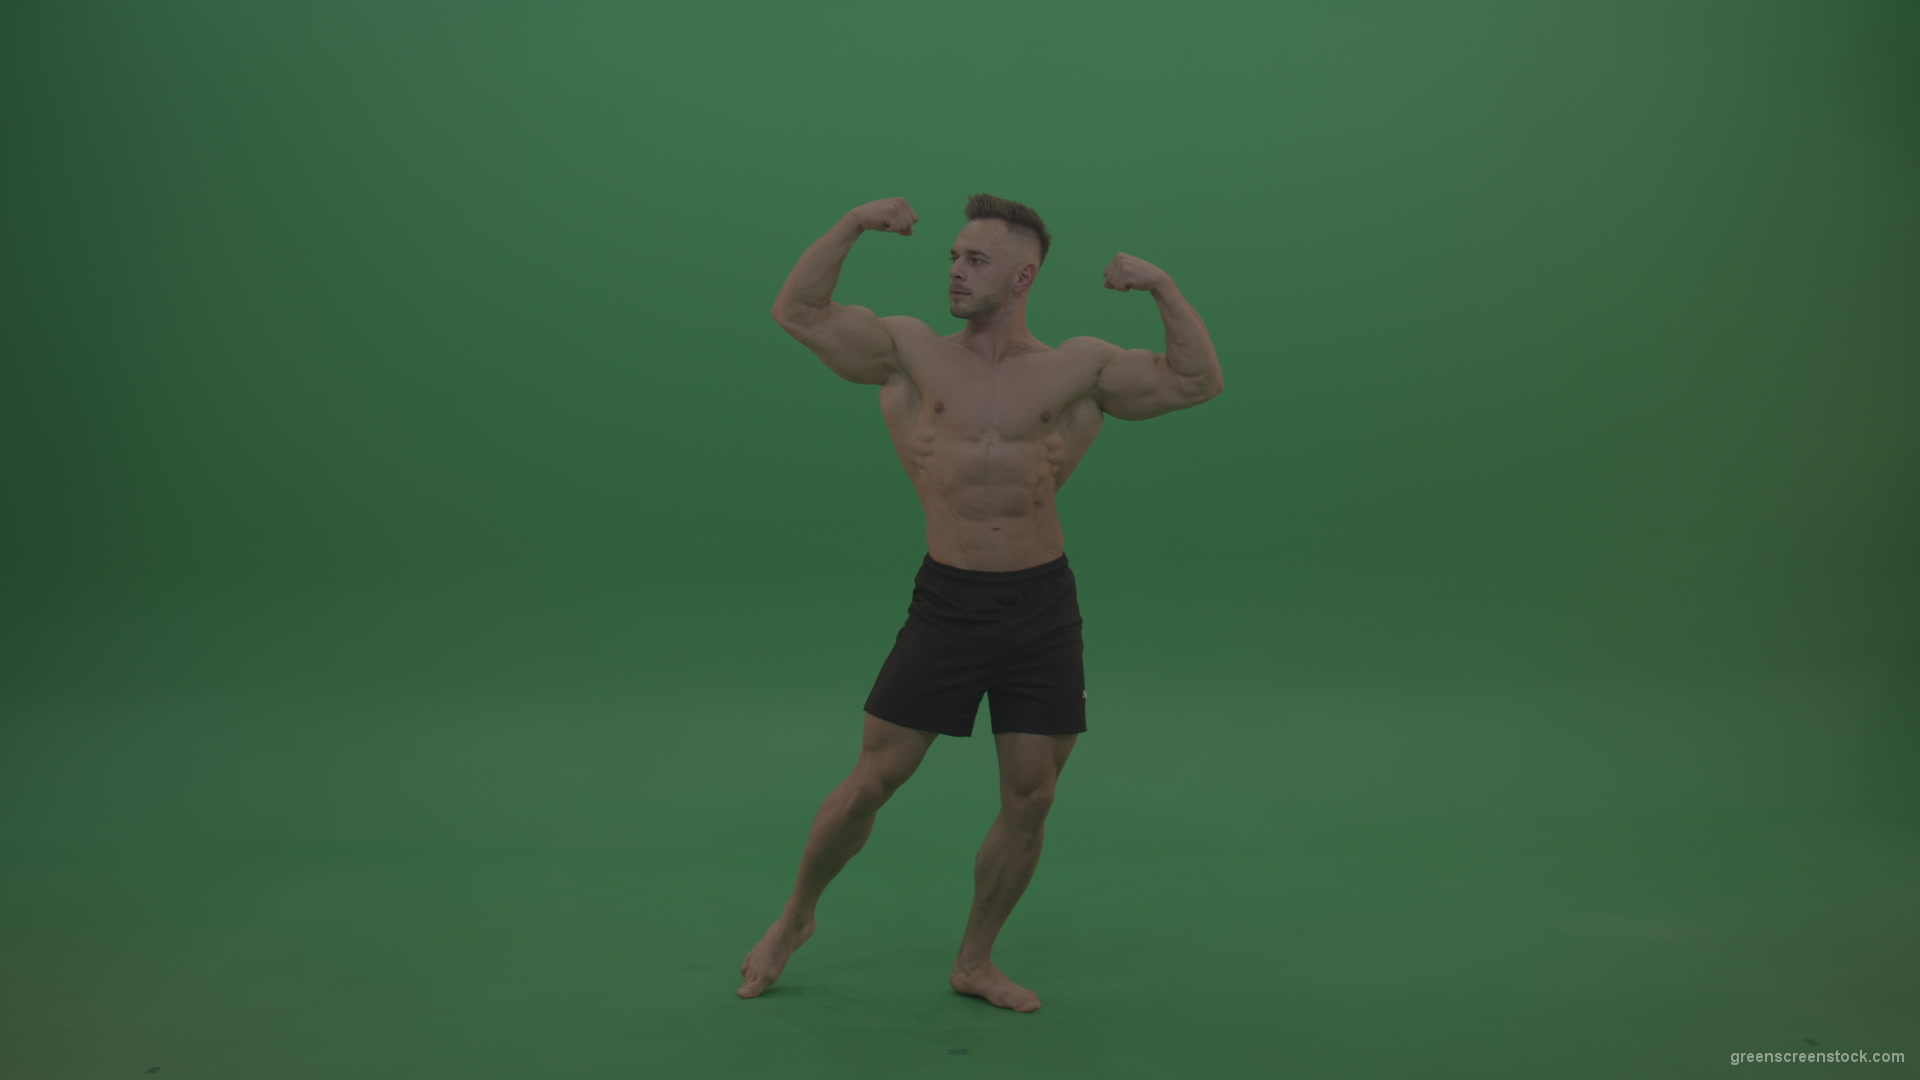 Young_Athletic_Bodybuilder_Demonstrating_Front_Double_Biceps_And_Lateral_Spread_Positions_On_Green_Screen_Wall_Background_005 Green Screen Stock